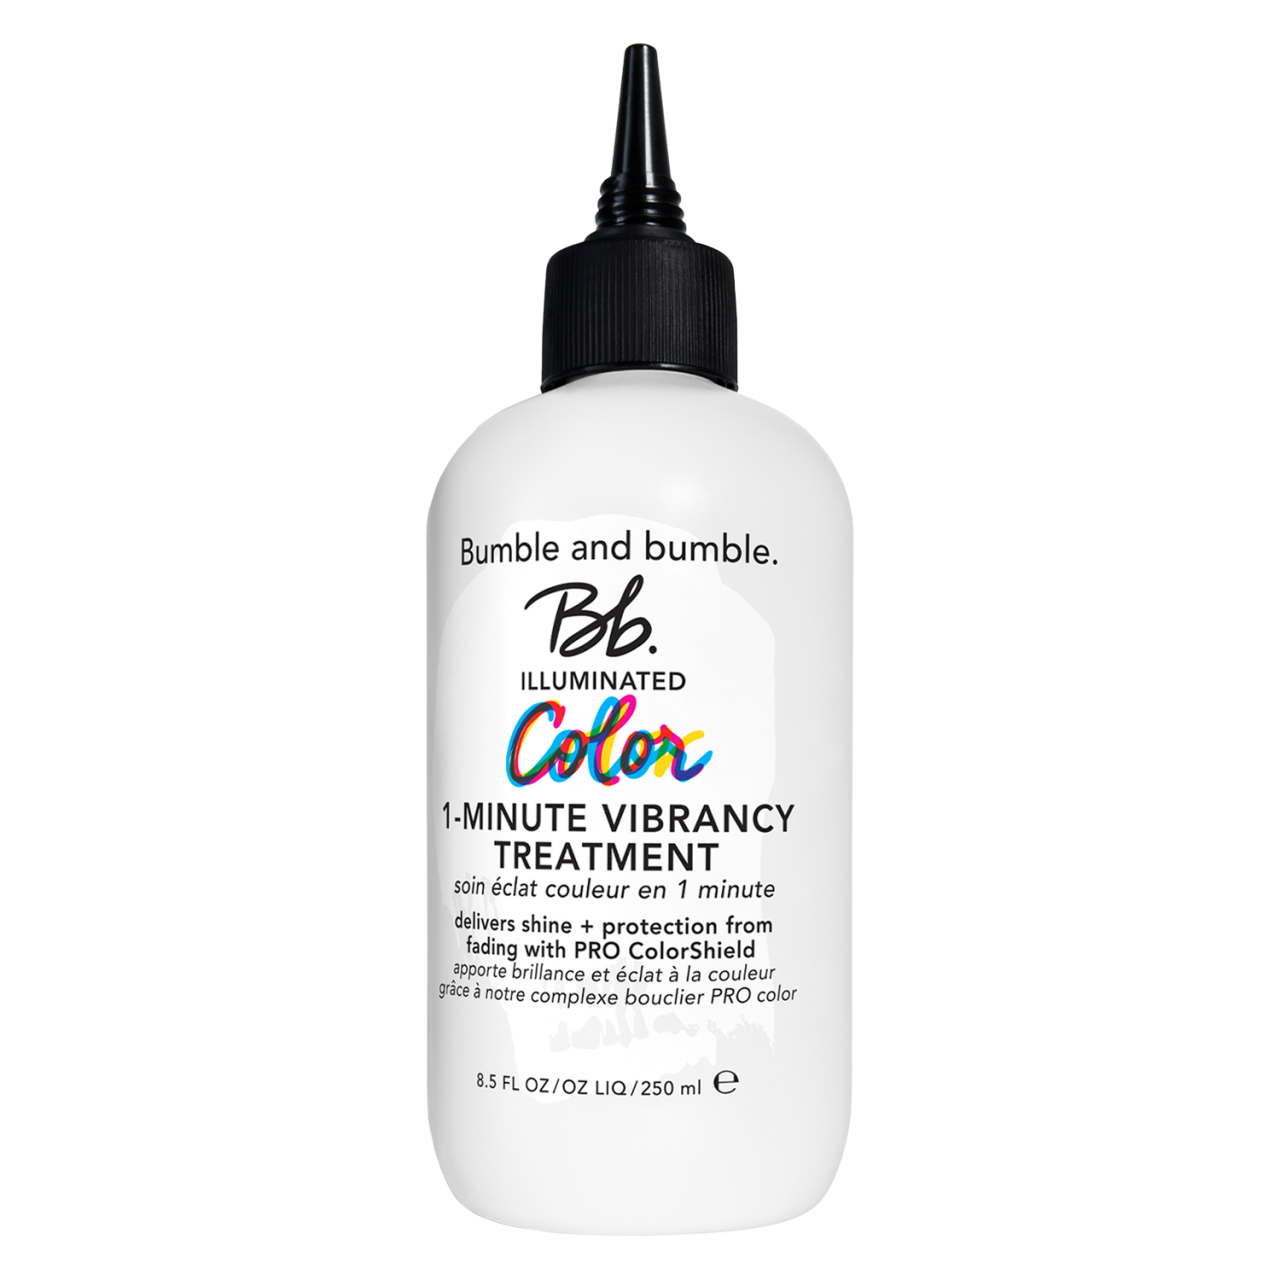 Bb. Color - Illuminated Color 1-Minute Vibrancy Treatment von Bumble and bumble.